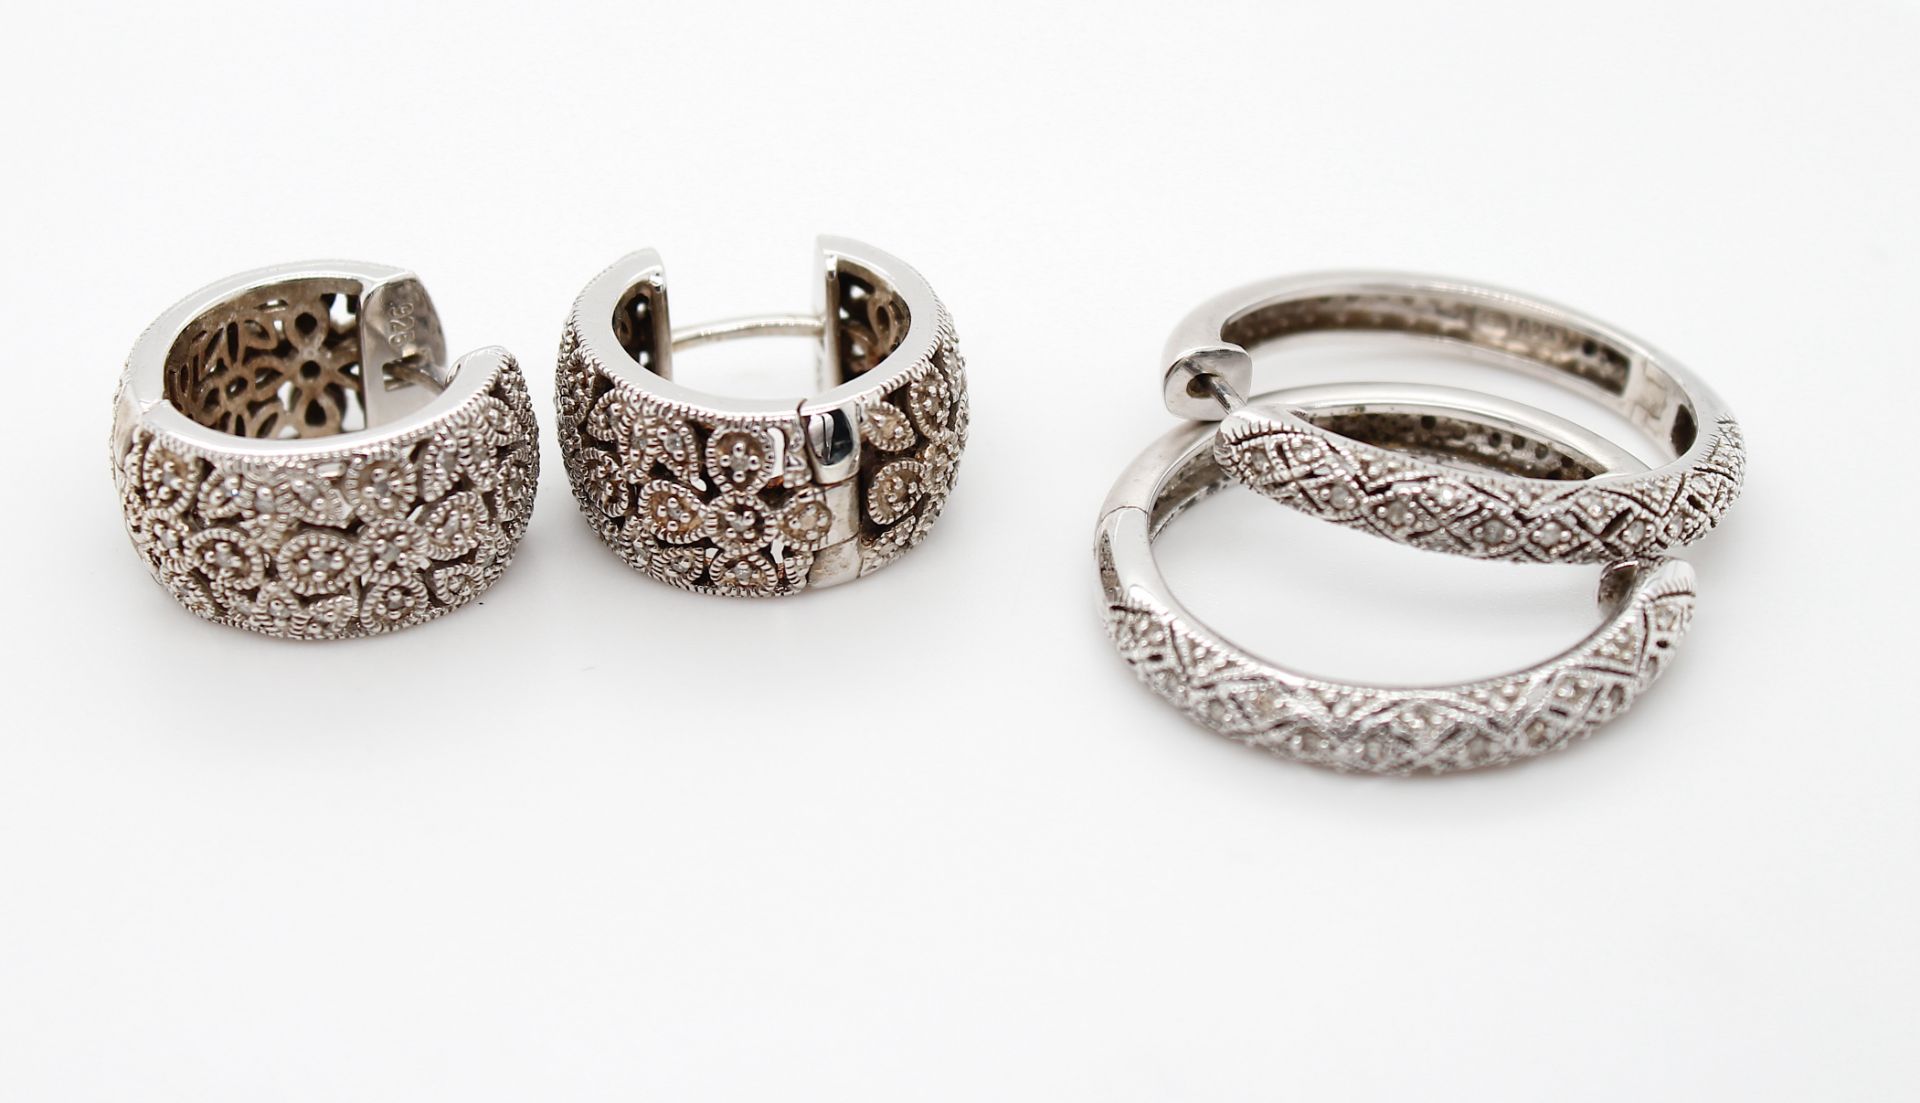 2 pairs of earrings 925 silver, diamonds - Image 3 of 5